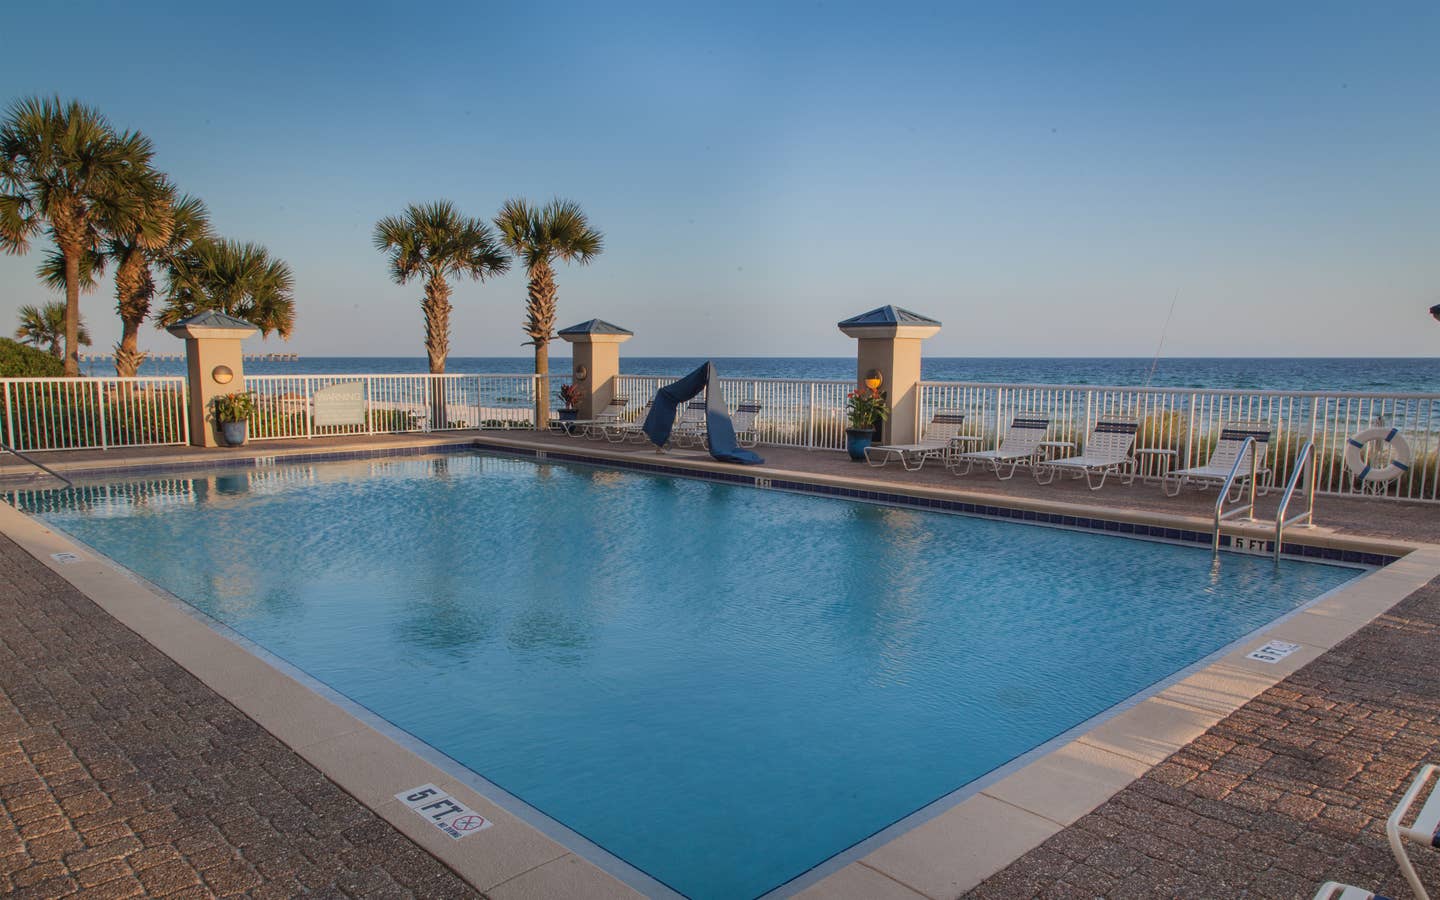 Outdoor pool with beach view at Panama City Beach Resort in Florida.